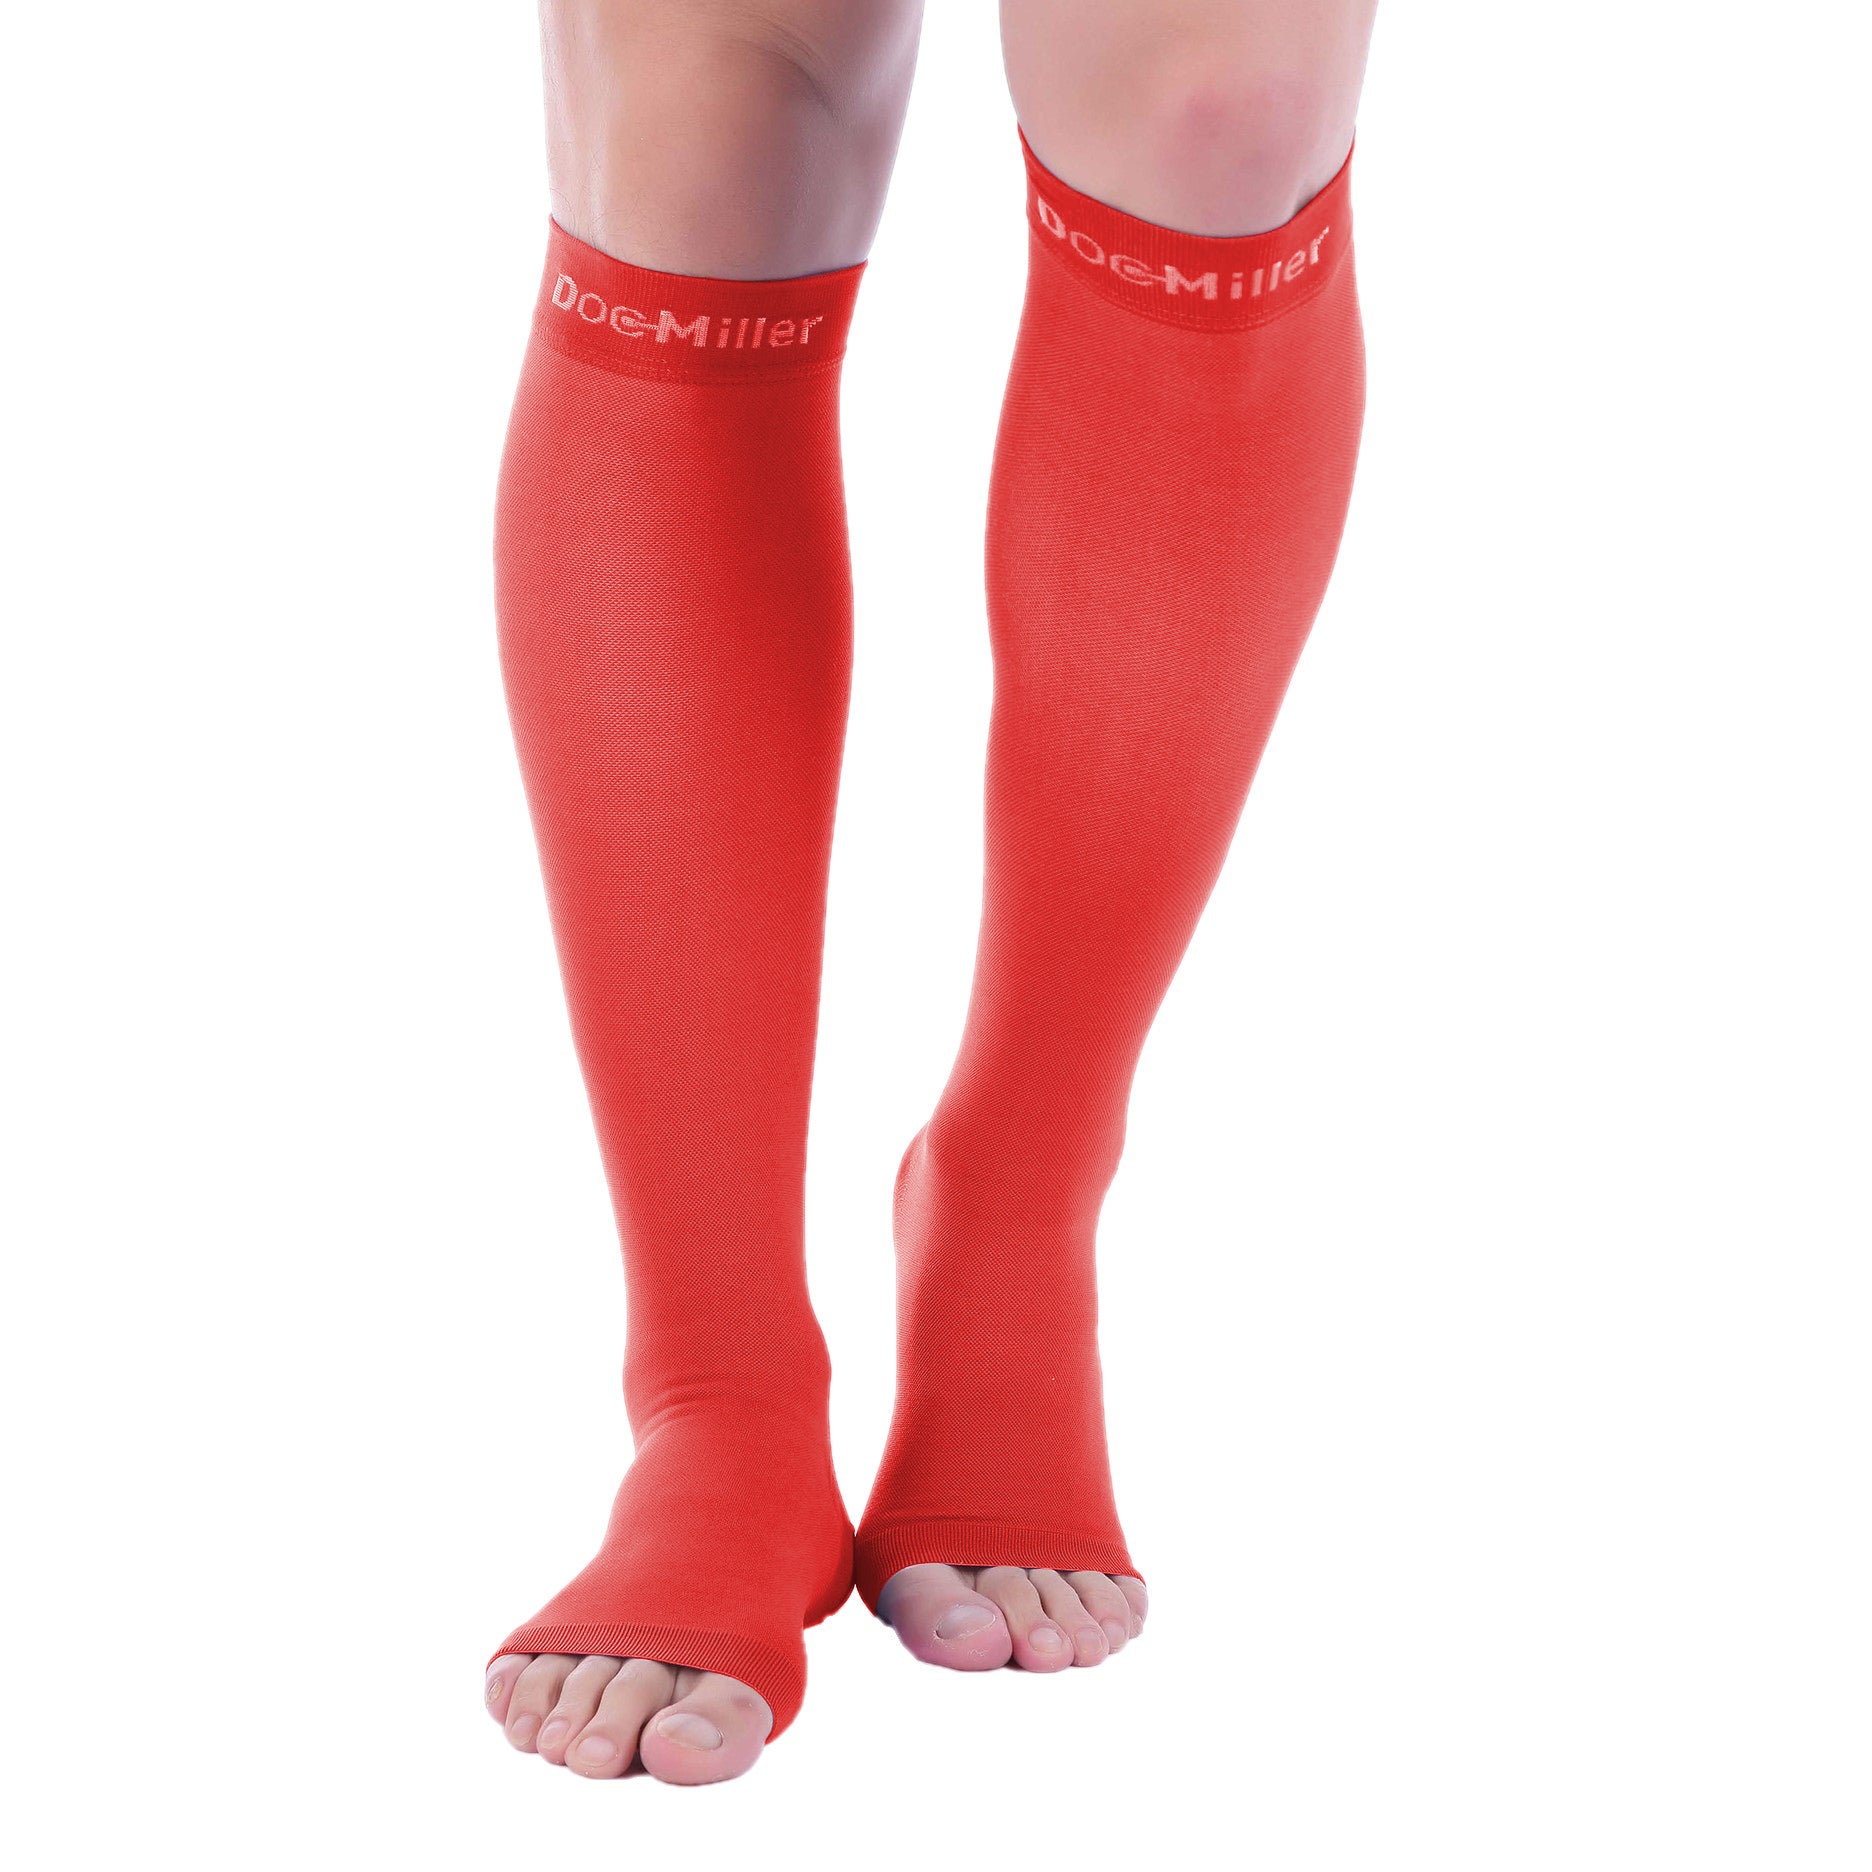 Open Toe Compression Socks 20-30 mmHg RED by Doc Miller